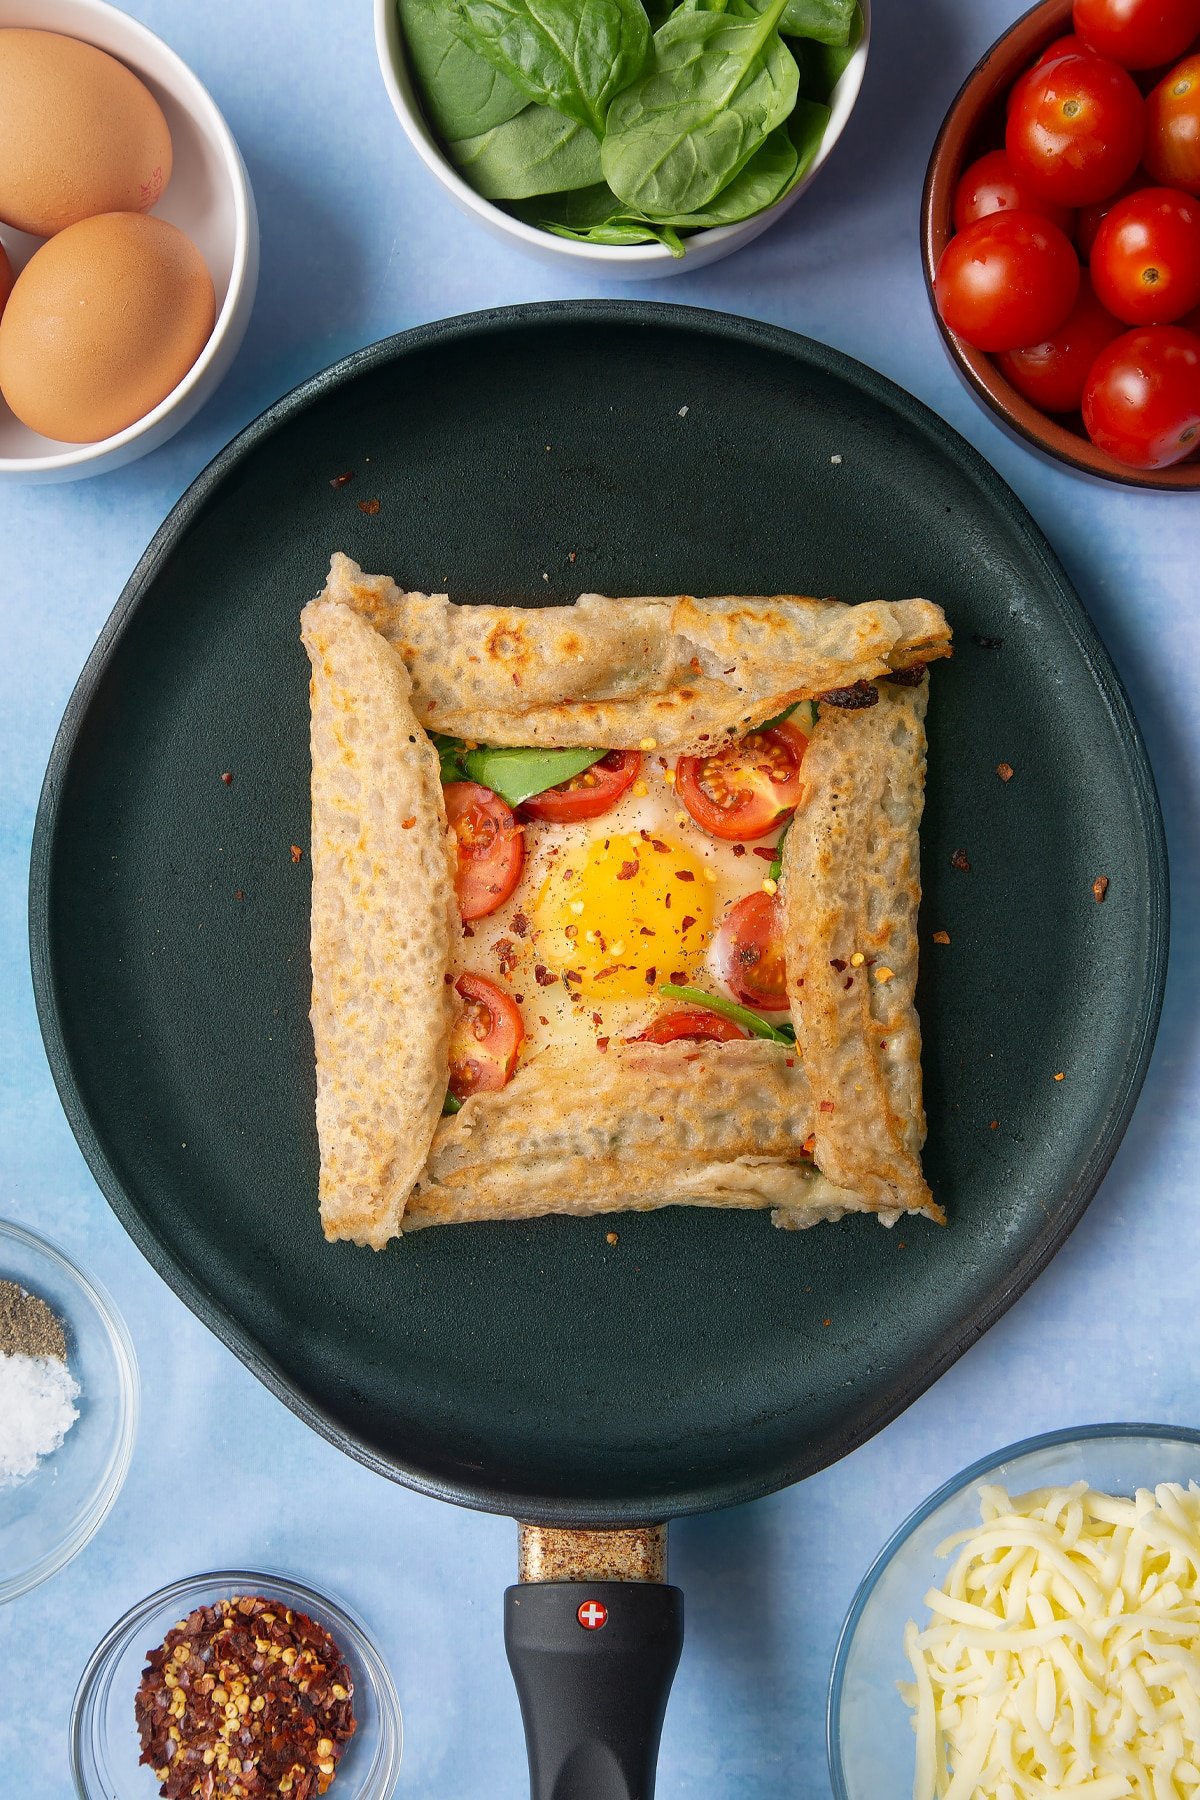 Folded buckwheat galette in a crepe pan, scattered with chilli flakes. Ingredients to make buckwheat galettes surround the pan.